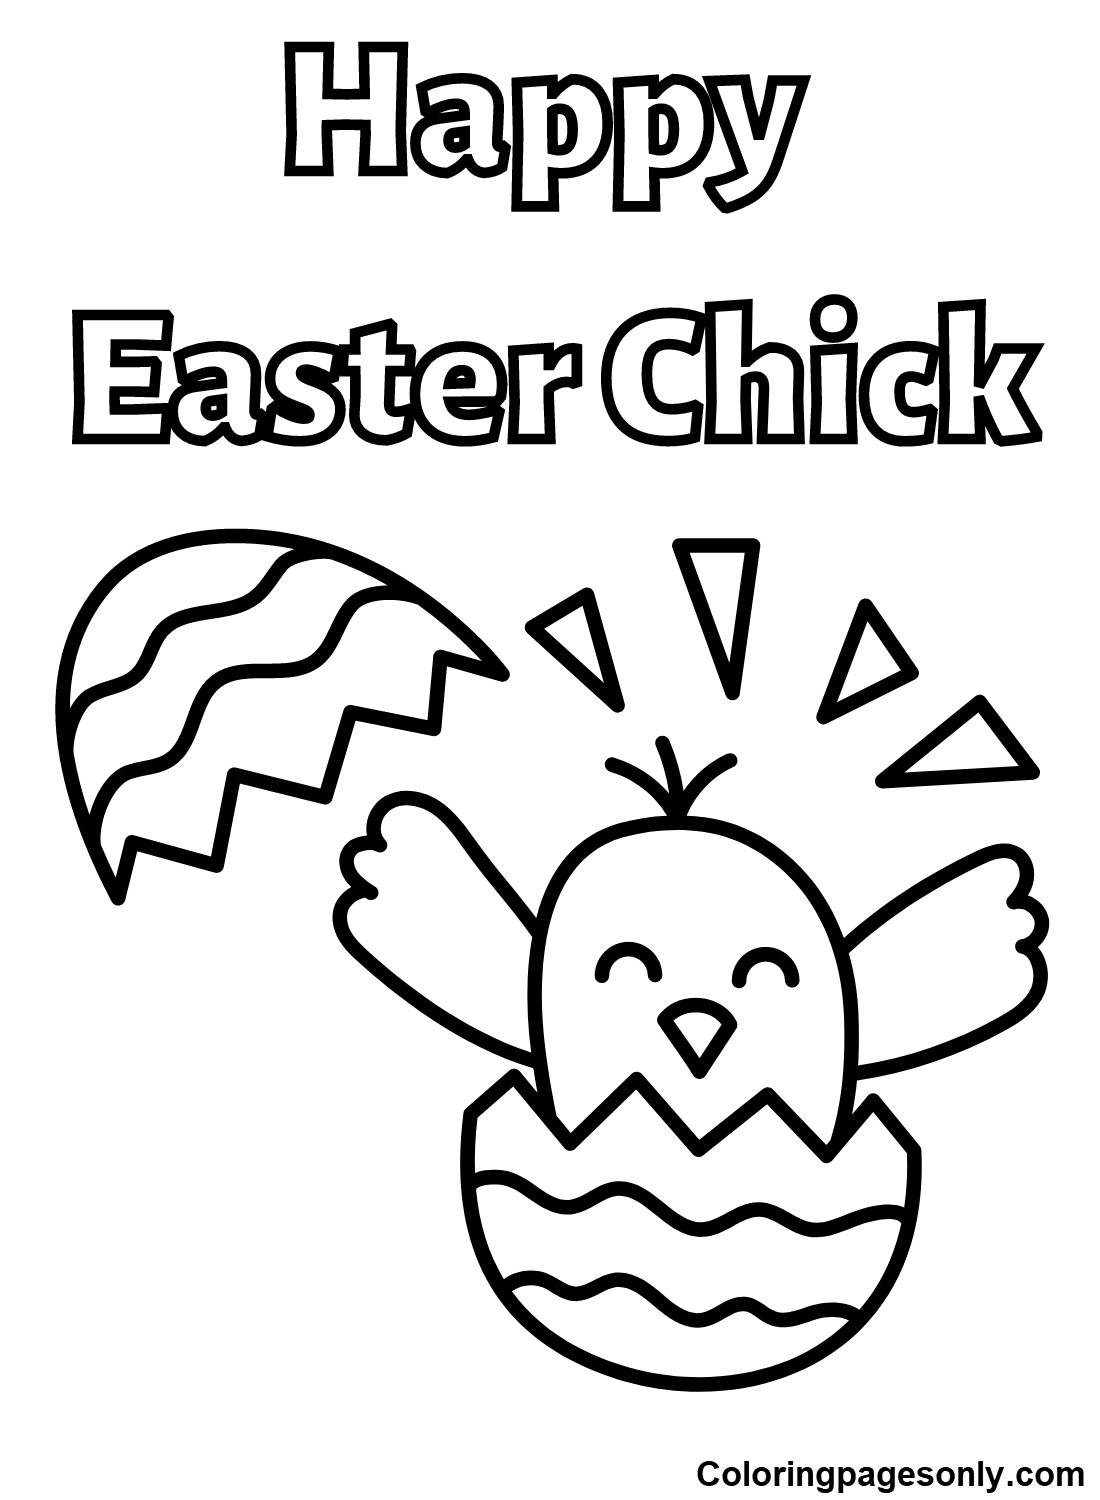 Happy Easter Chick Coloring Pages